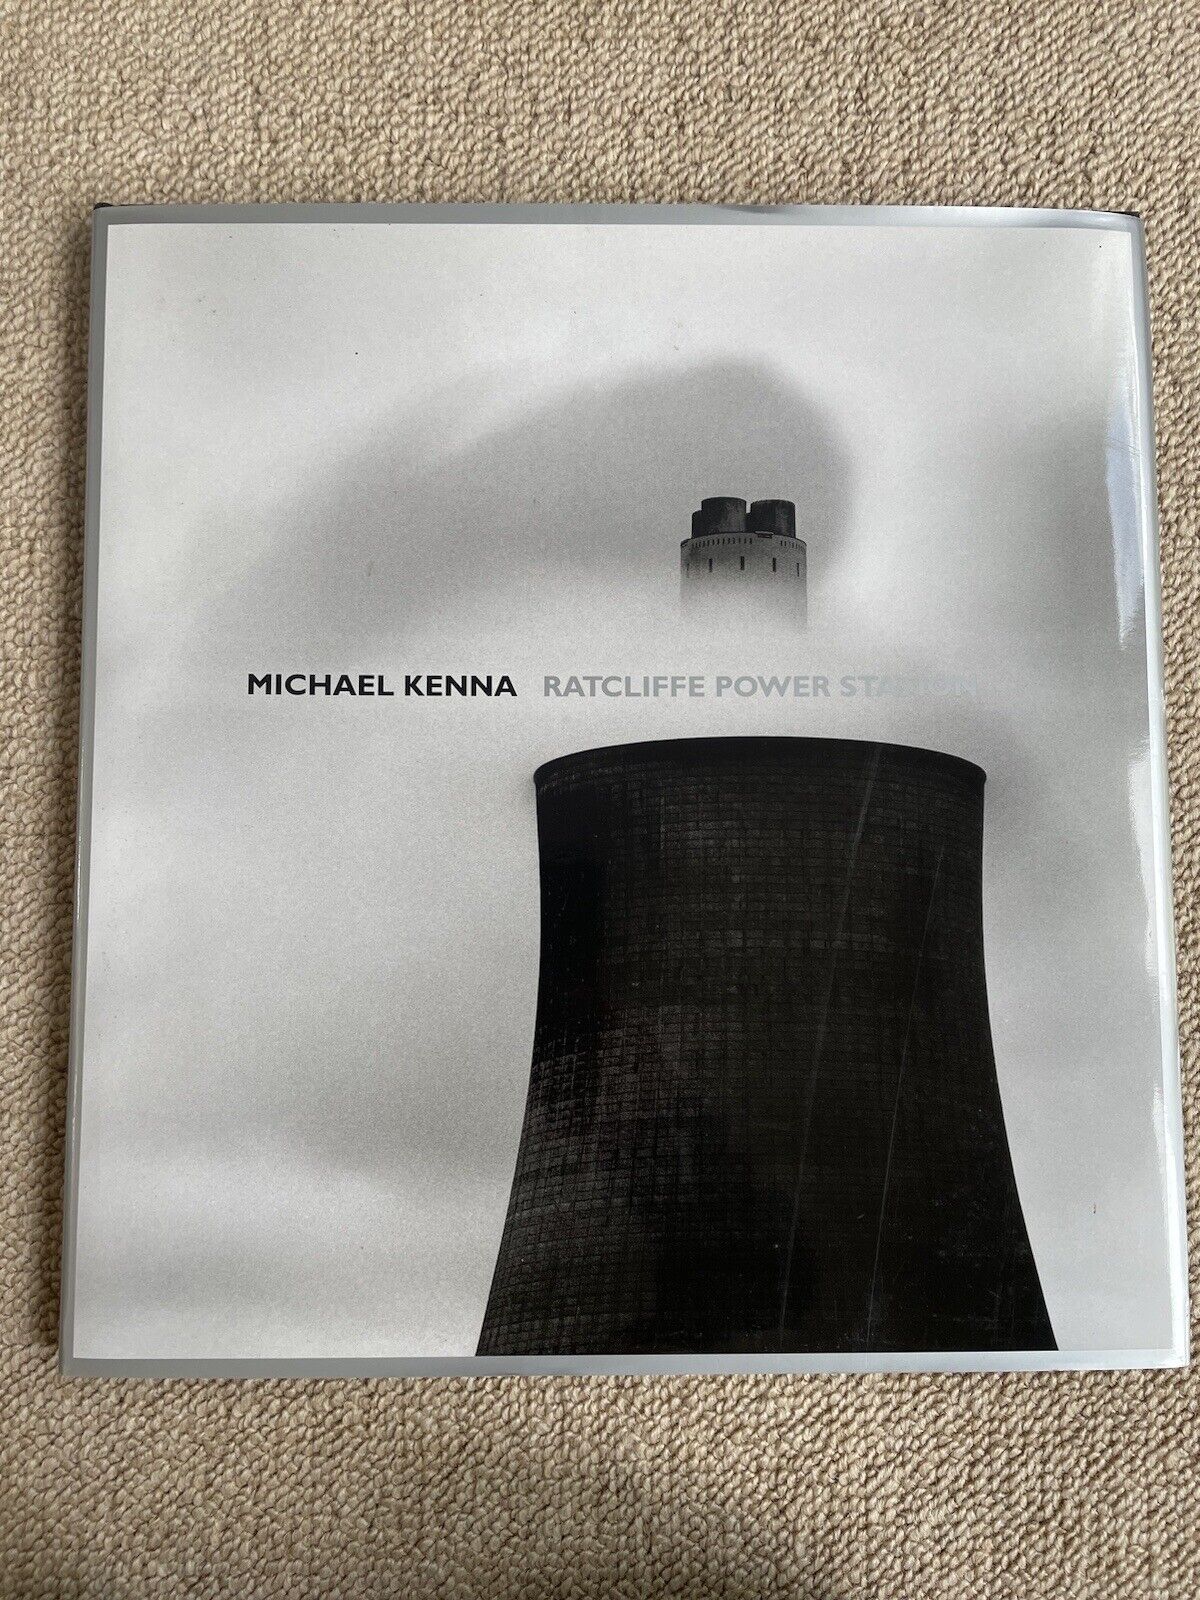 RATCLIFFE POWER STATION By MICHAEL KENNA - A Psychophotographic study